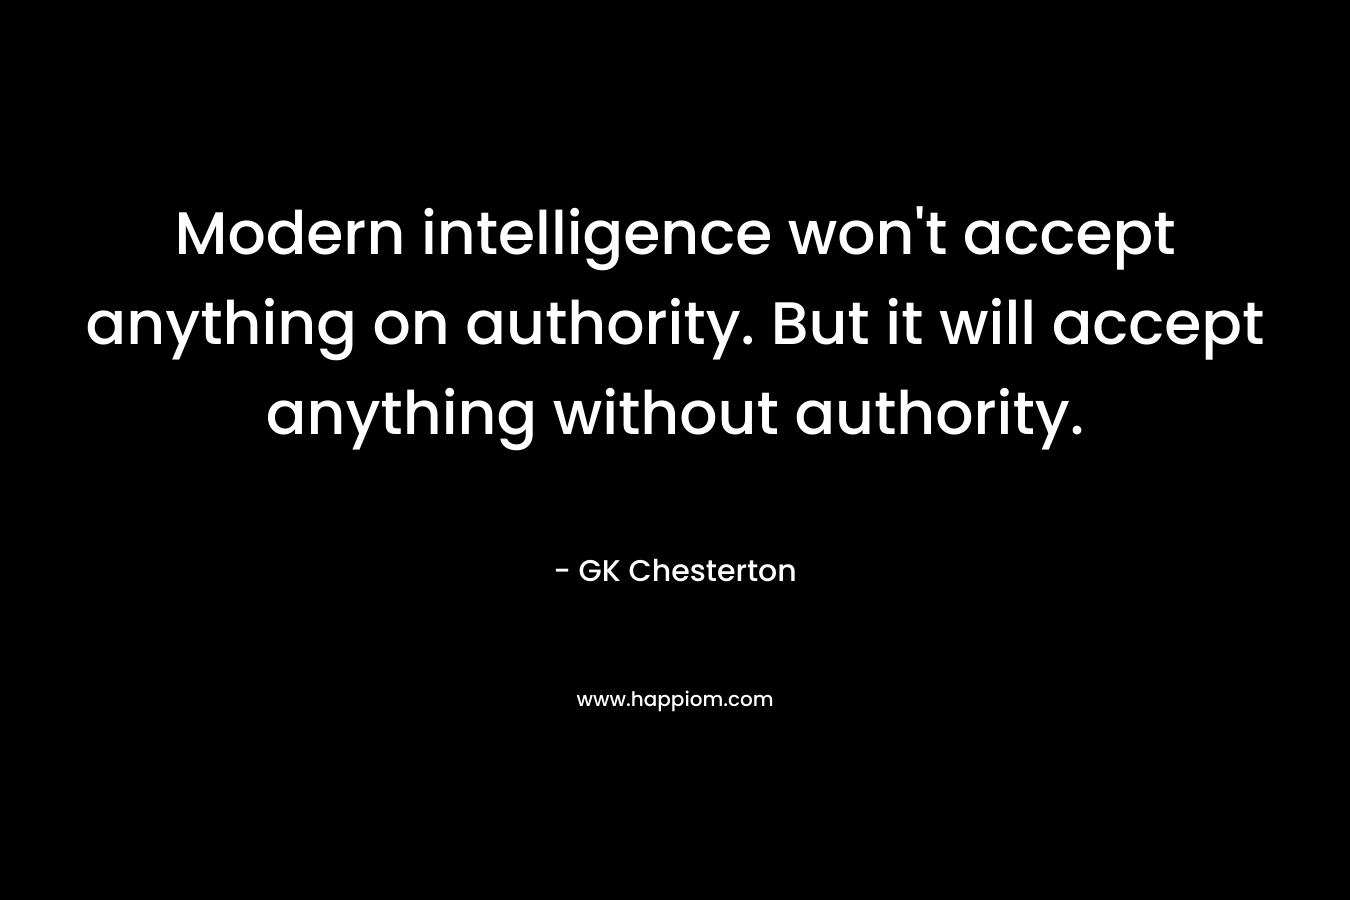 Modern intelligence won't accept anything on authority. But it will accept anything without authority.